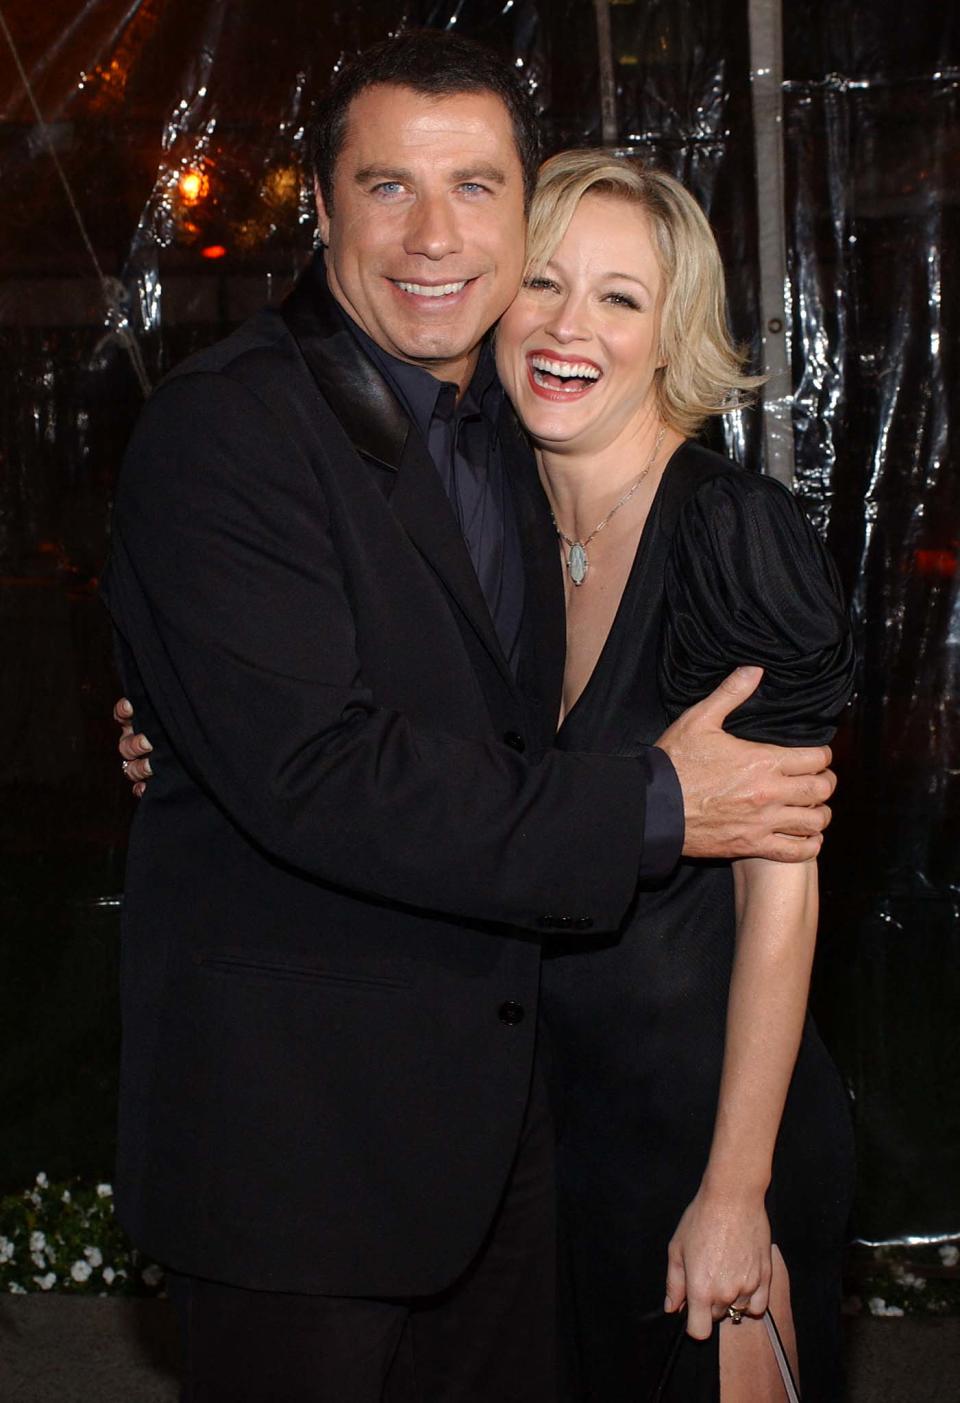 John Travolta and Teri Polo hug at the premiere of their film "Domestic Disturbance" in Hollywood in 2001.